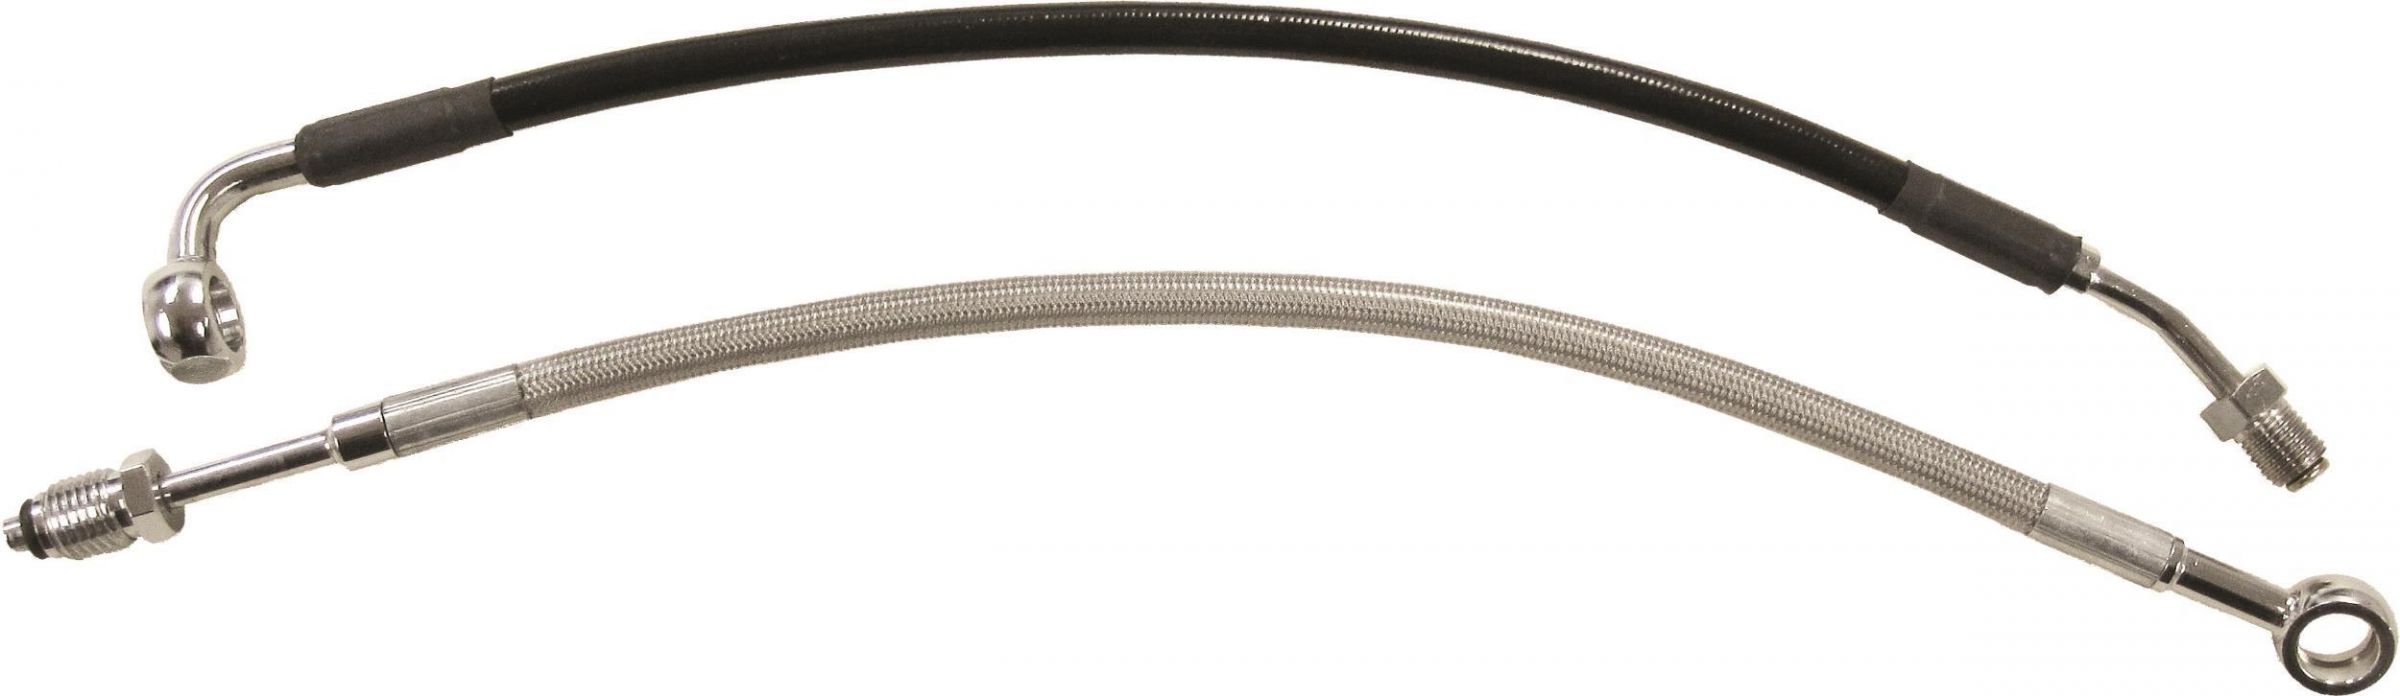 86OO-GOODRIDG-HD0006-1CCH-8 Stainless Steel Braided Hydraulic Clutch Line Kit - 8in. Over Stock - Clear Coated